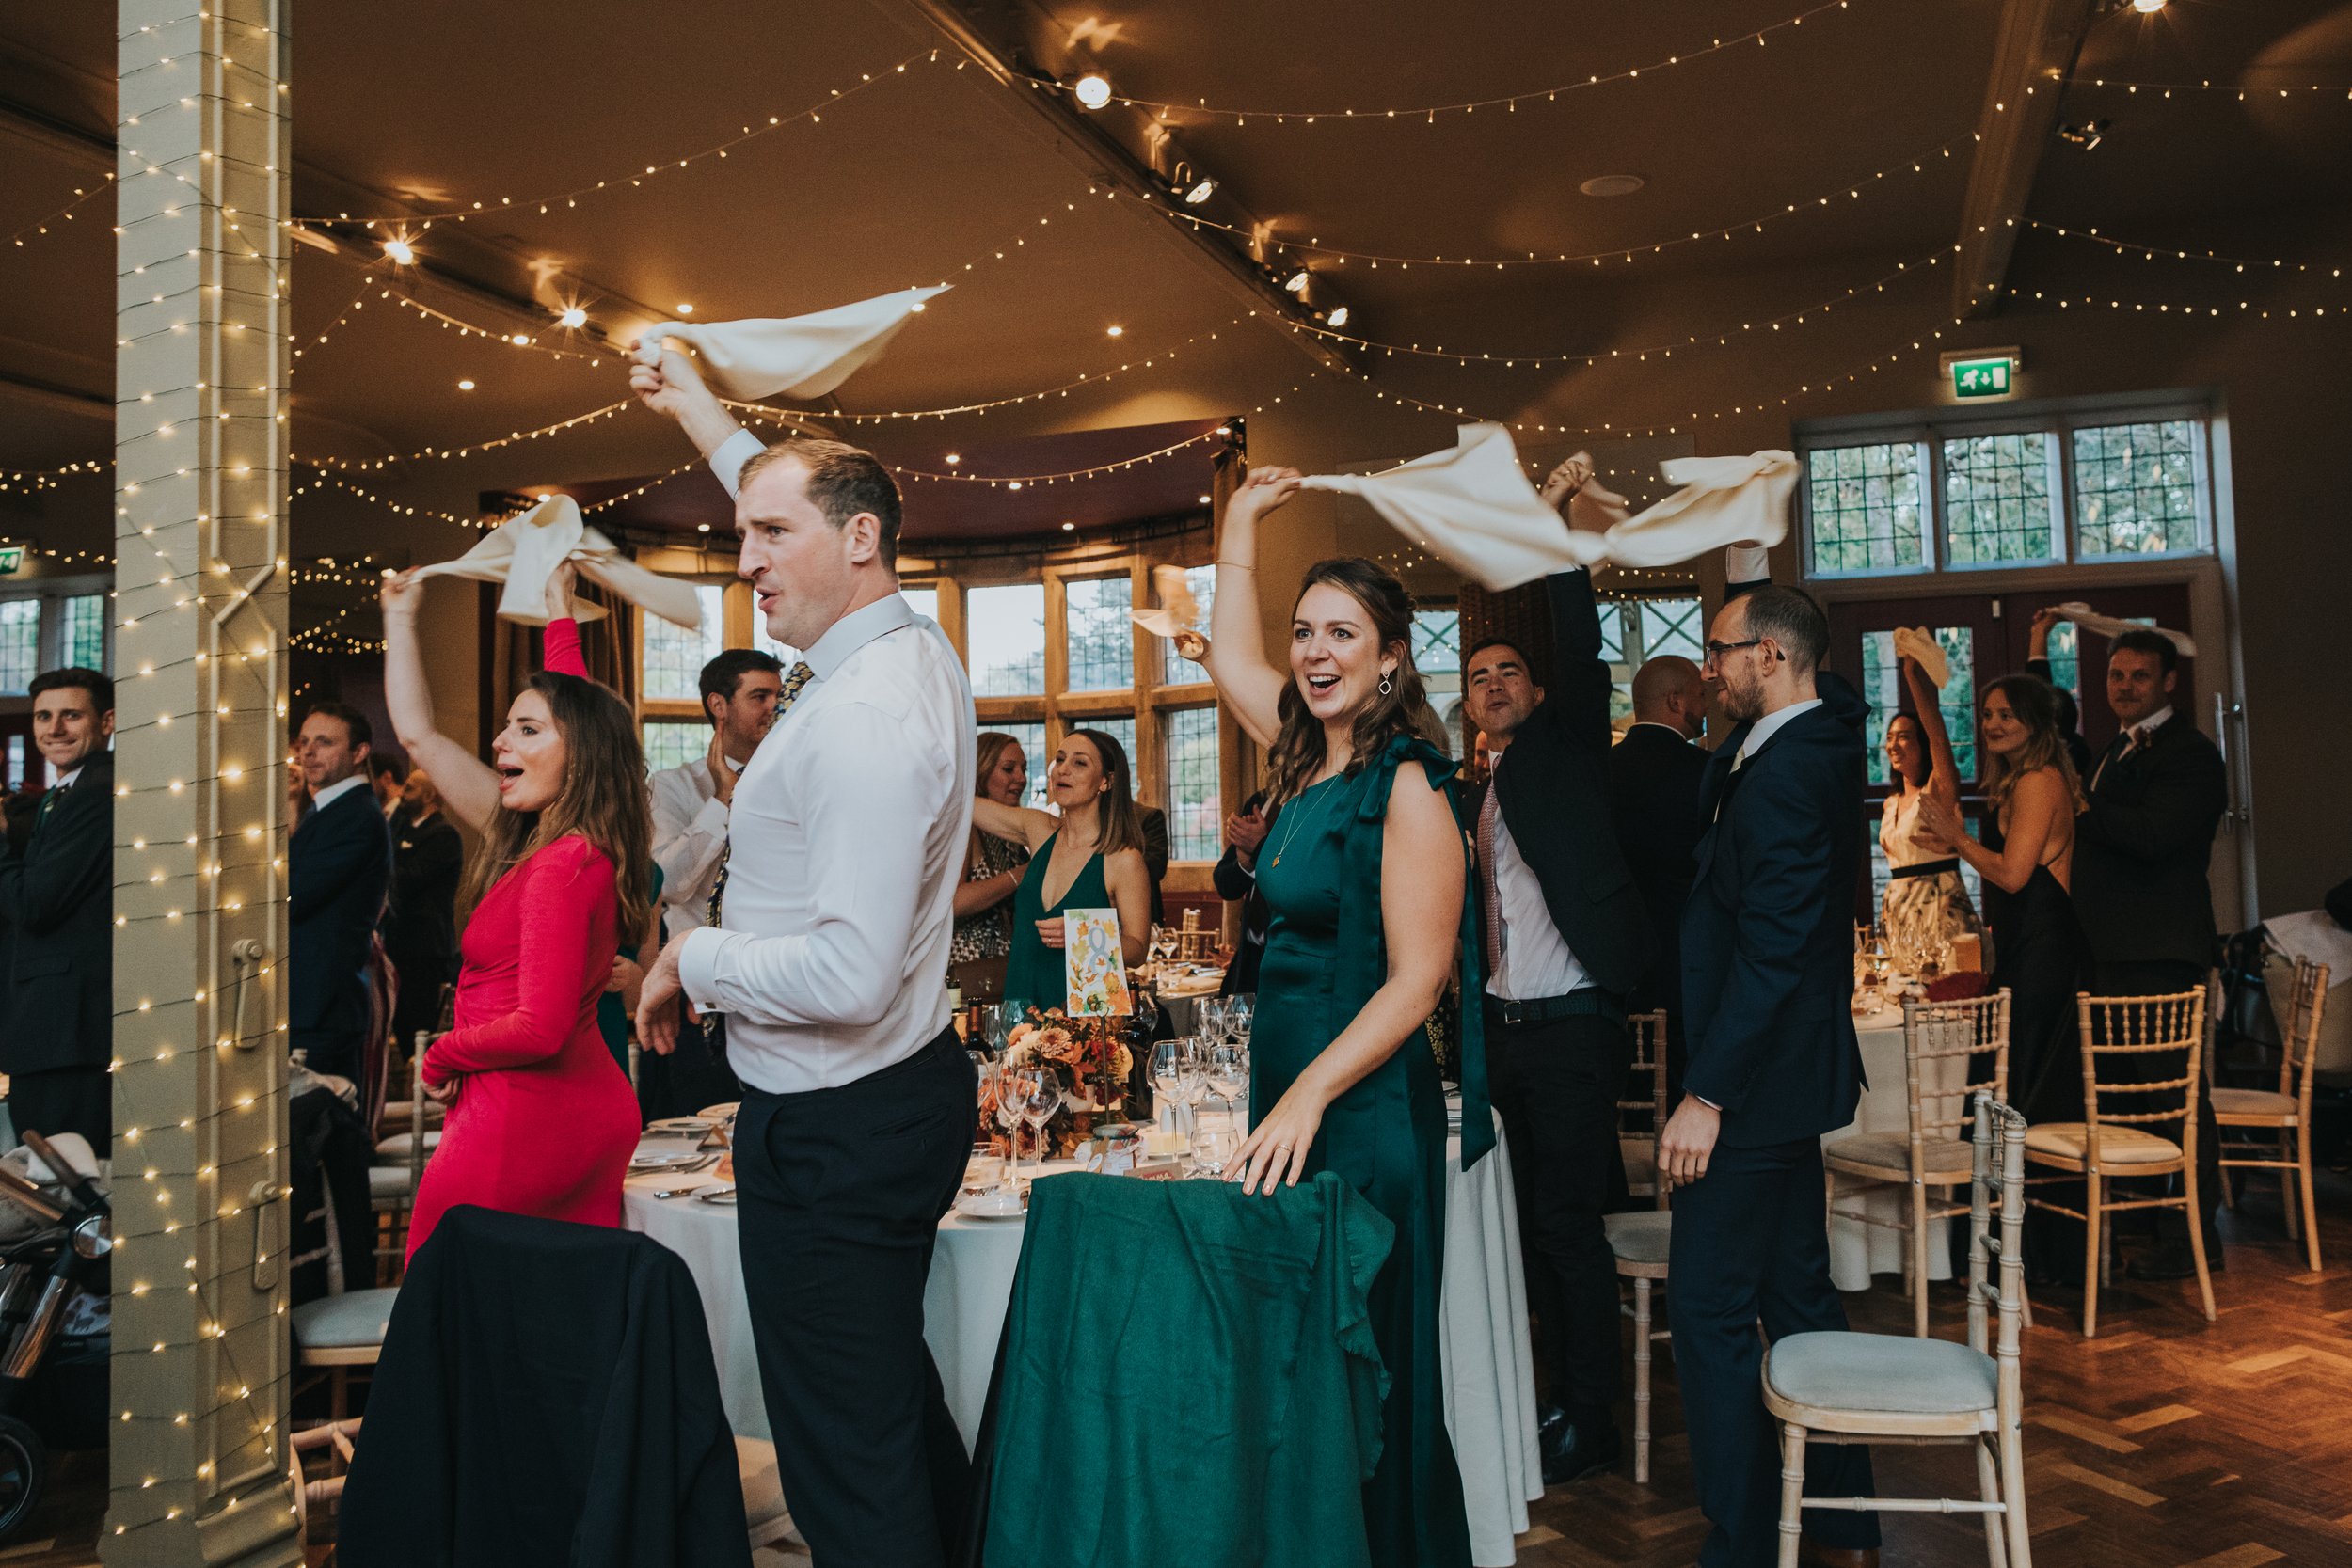 Wedding guests stand and swirl napkins in the air on couples arrival.